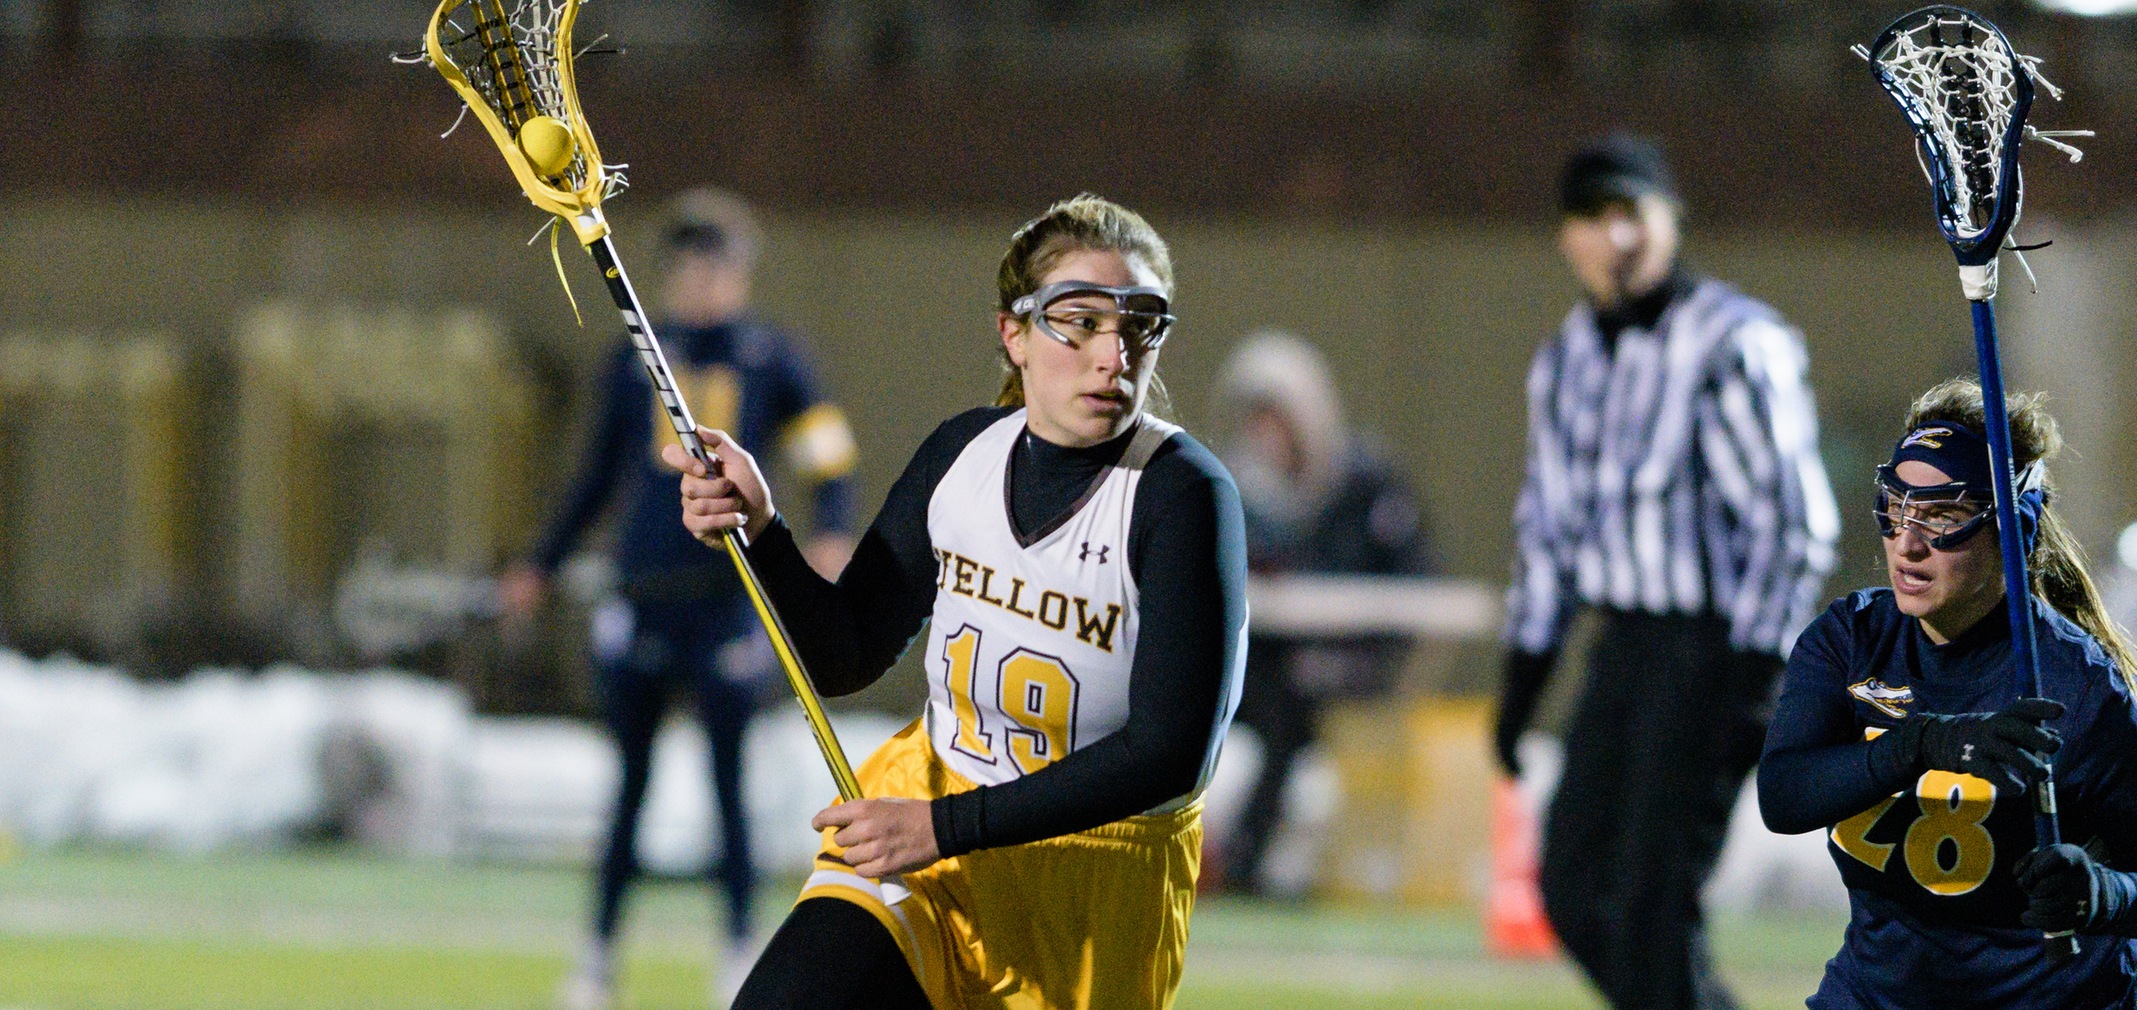 Senior attack Caitlin Wheeler recorded a career-high nine points against Ohio Northern (Photo courtesy of Jesse Kucewicz)